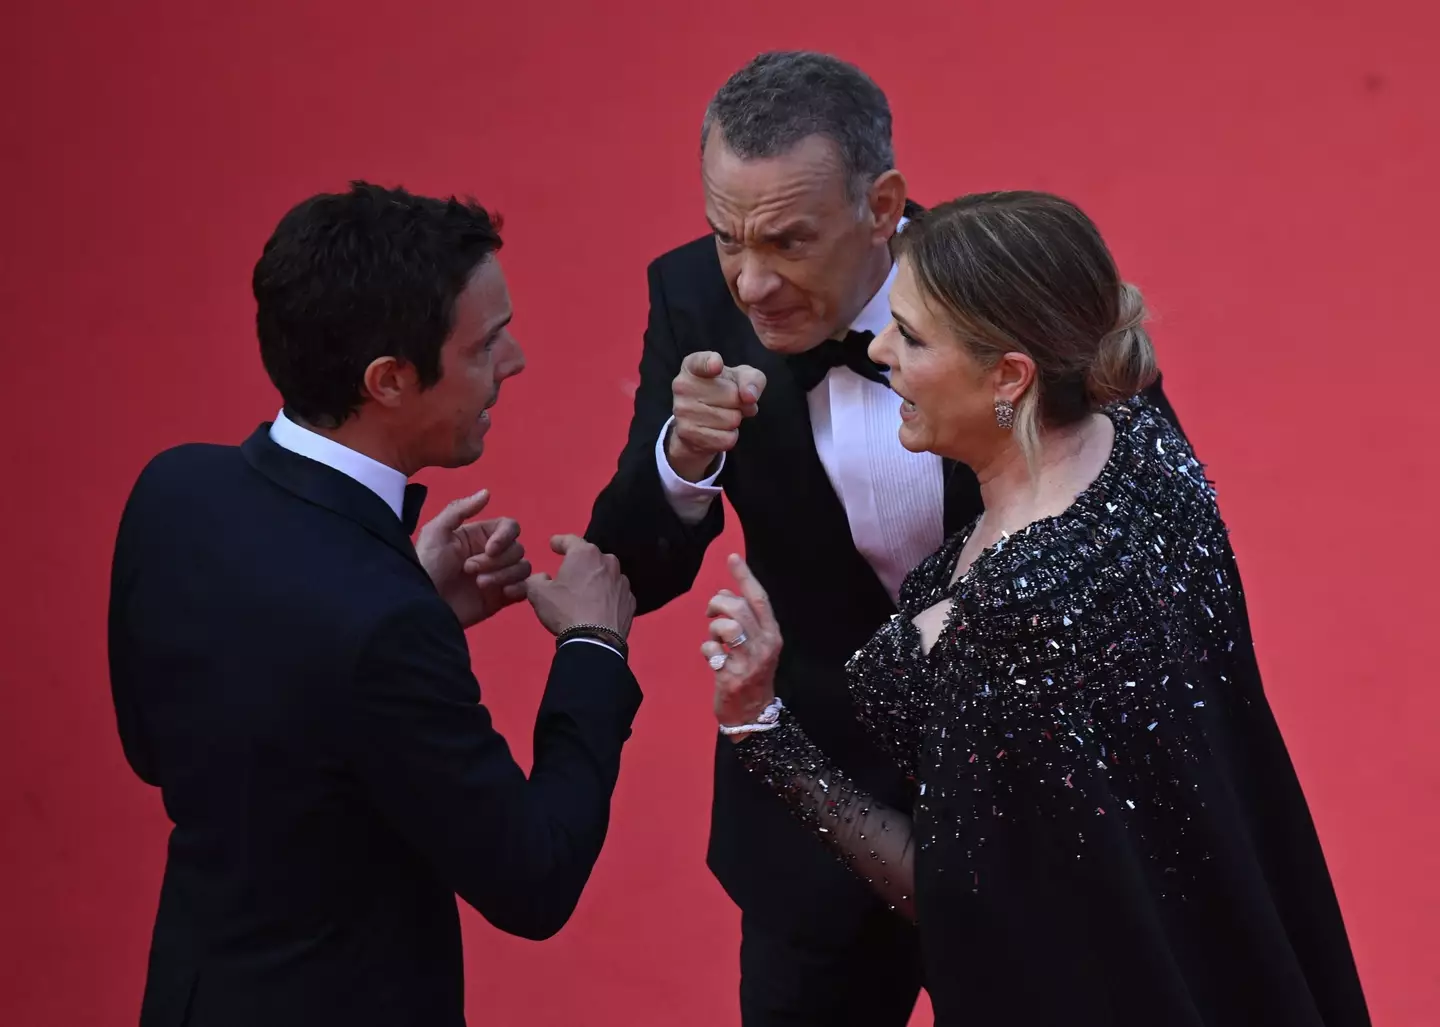 Tom Hanks and Rita Wilson were seen looking 'furious' on the red carpet at Cannes.